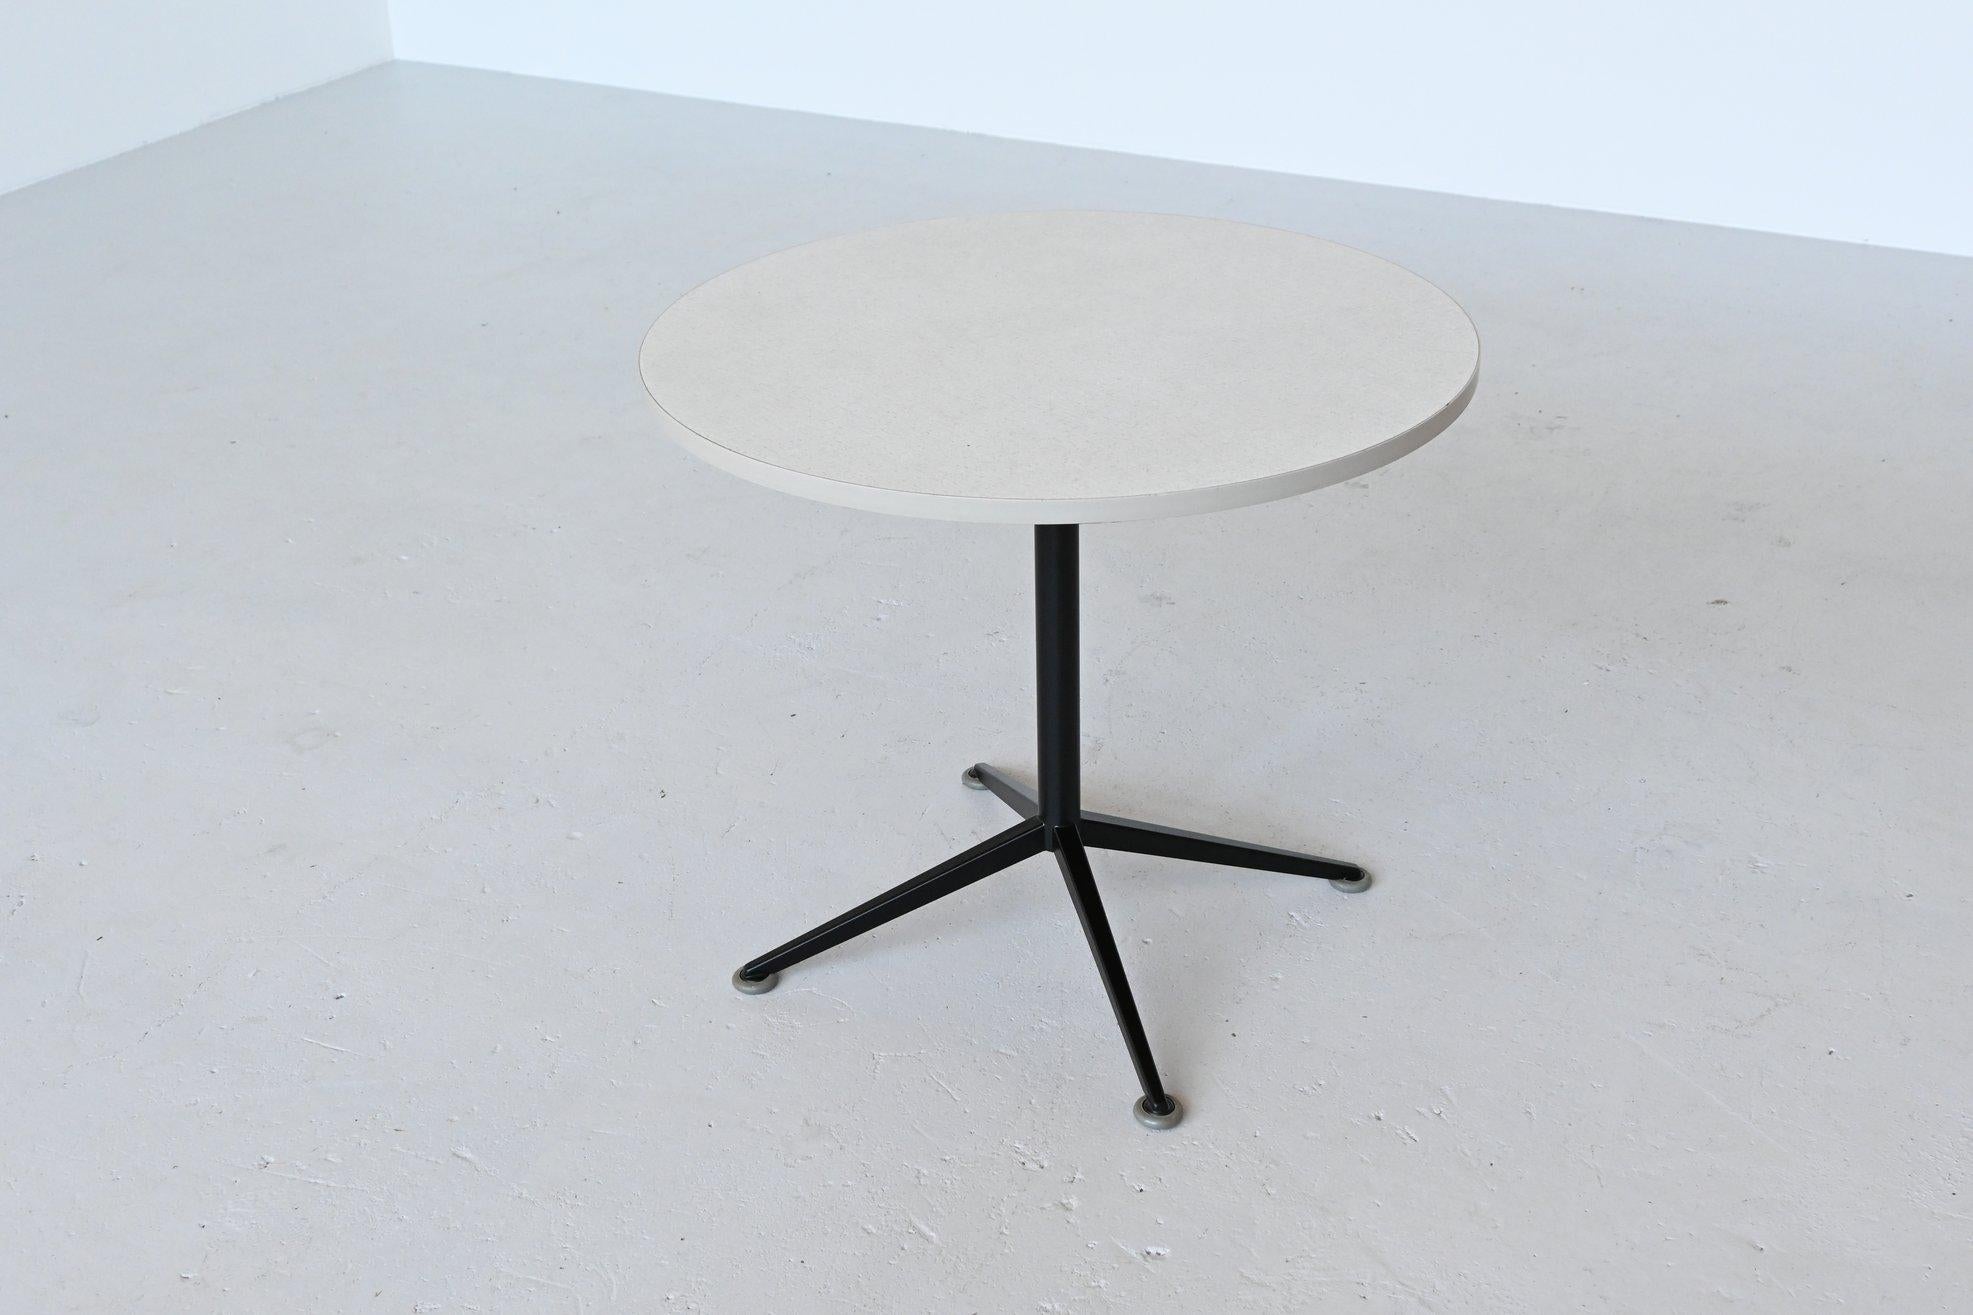 Super rare dining table designed by Friso Kramer for Ahrend de Cirkel, the Netherlands, 1965. This table is from the Eindhoven University of Technology. Very nicely shaped table with black coated metal legs, grey rubber feet and a white Formica top.